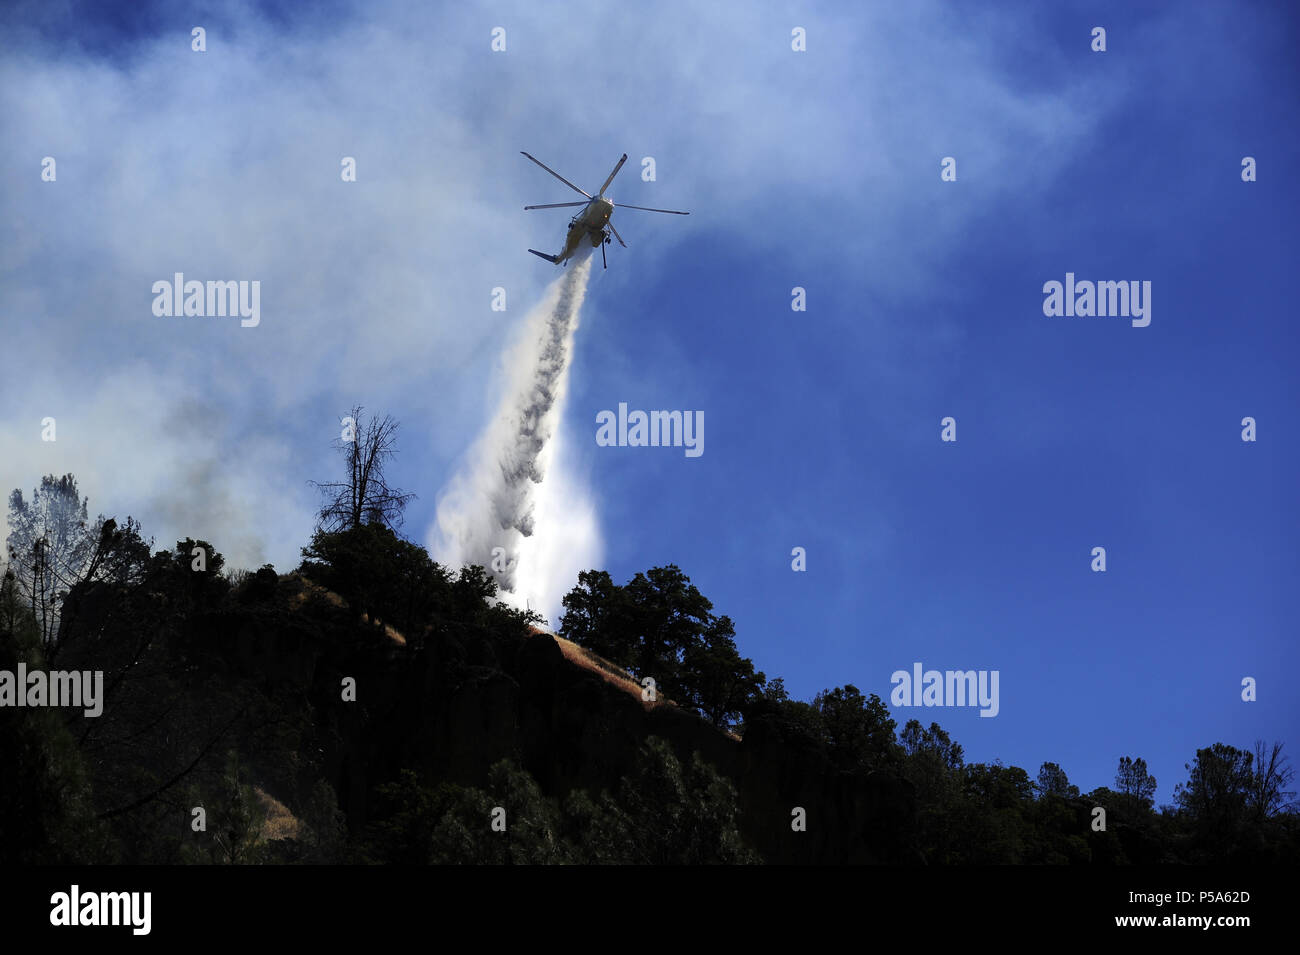 June 24, 2018 - Clearlake Oaks, California, USA - The Pawnee Fire in Lake County continued to show aggressive fire behavior in the early afternoon of Sunday. Fire crews focused on structure protection while helicopters make water drops to assist the strike teams on the ground. (Credit Image: © Neal Waters via ZUMA Wire) Stock Photo